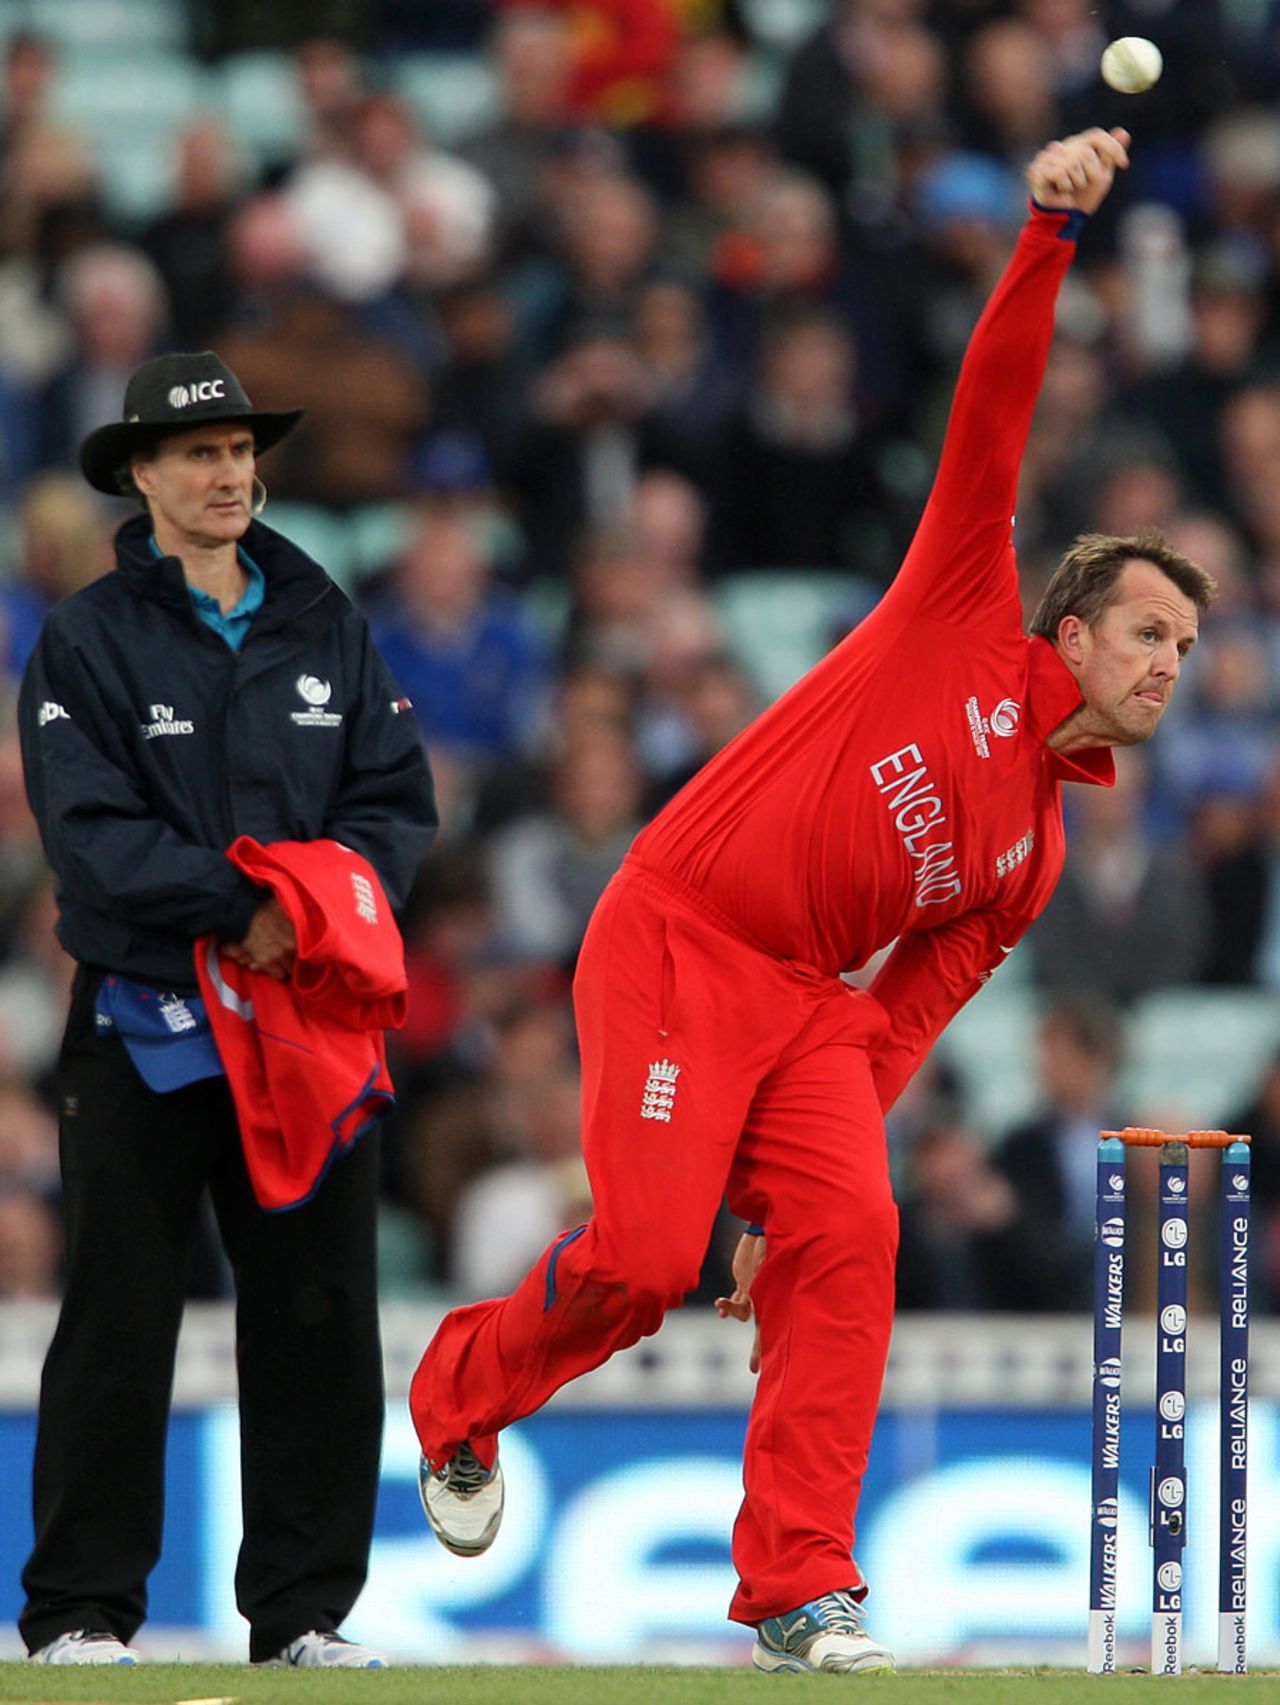 Graeme Swann's final over that went for 16 spoiled his figures, England v Sri Lanka, Champions Trophy, Group A, The Oval, June 13, 2013